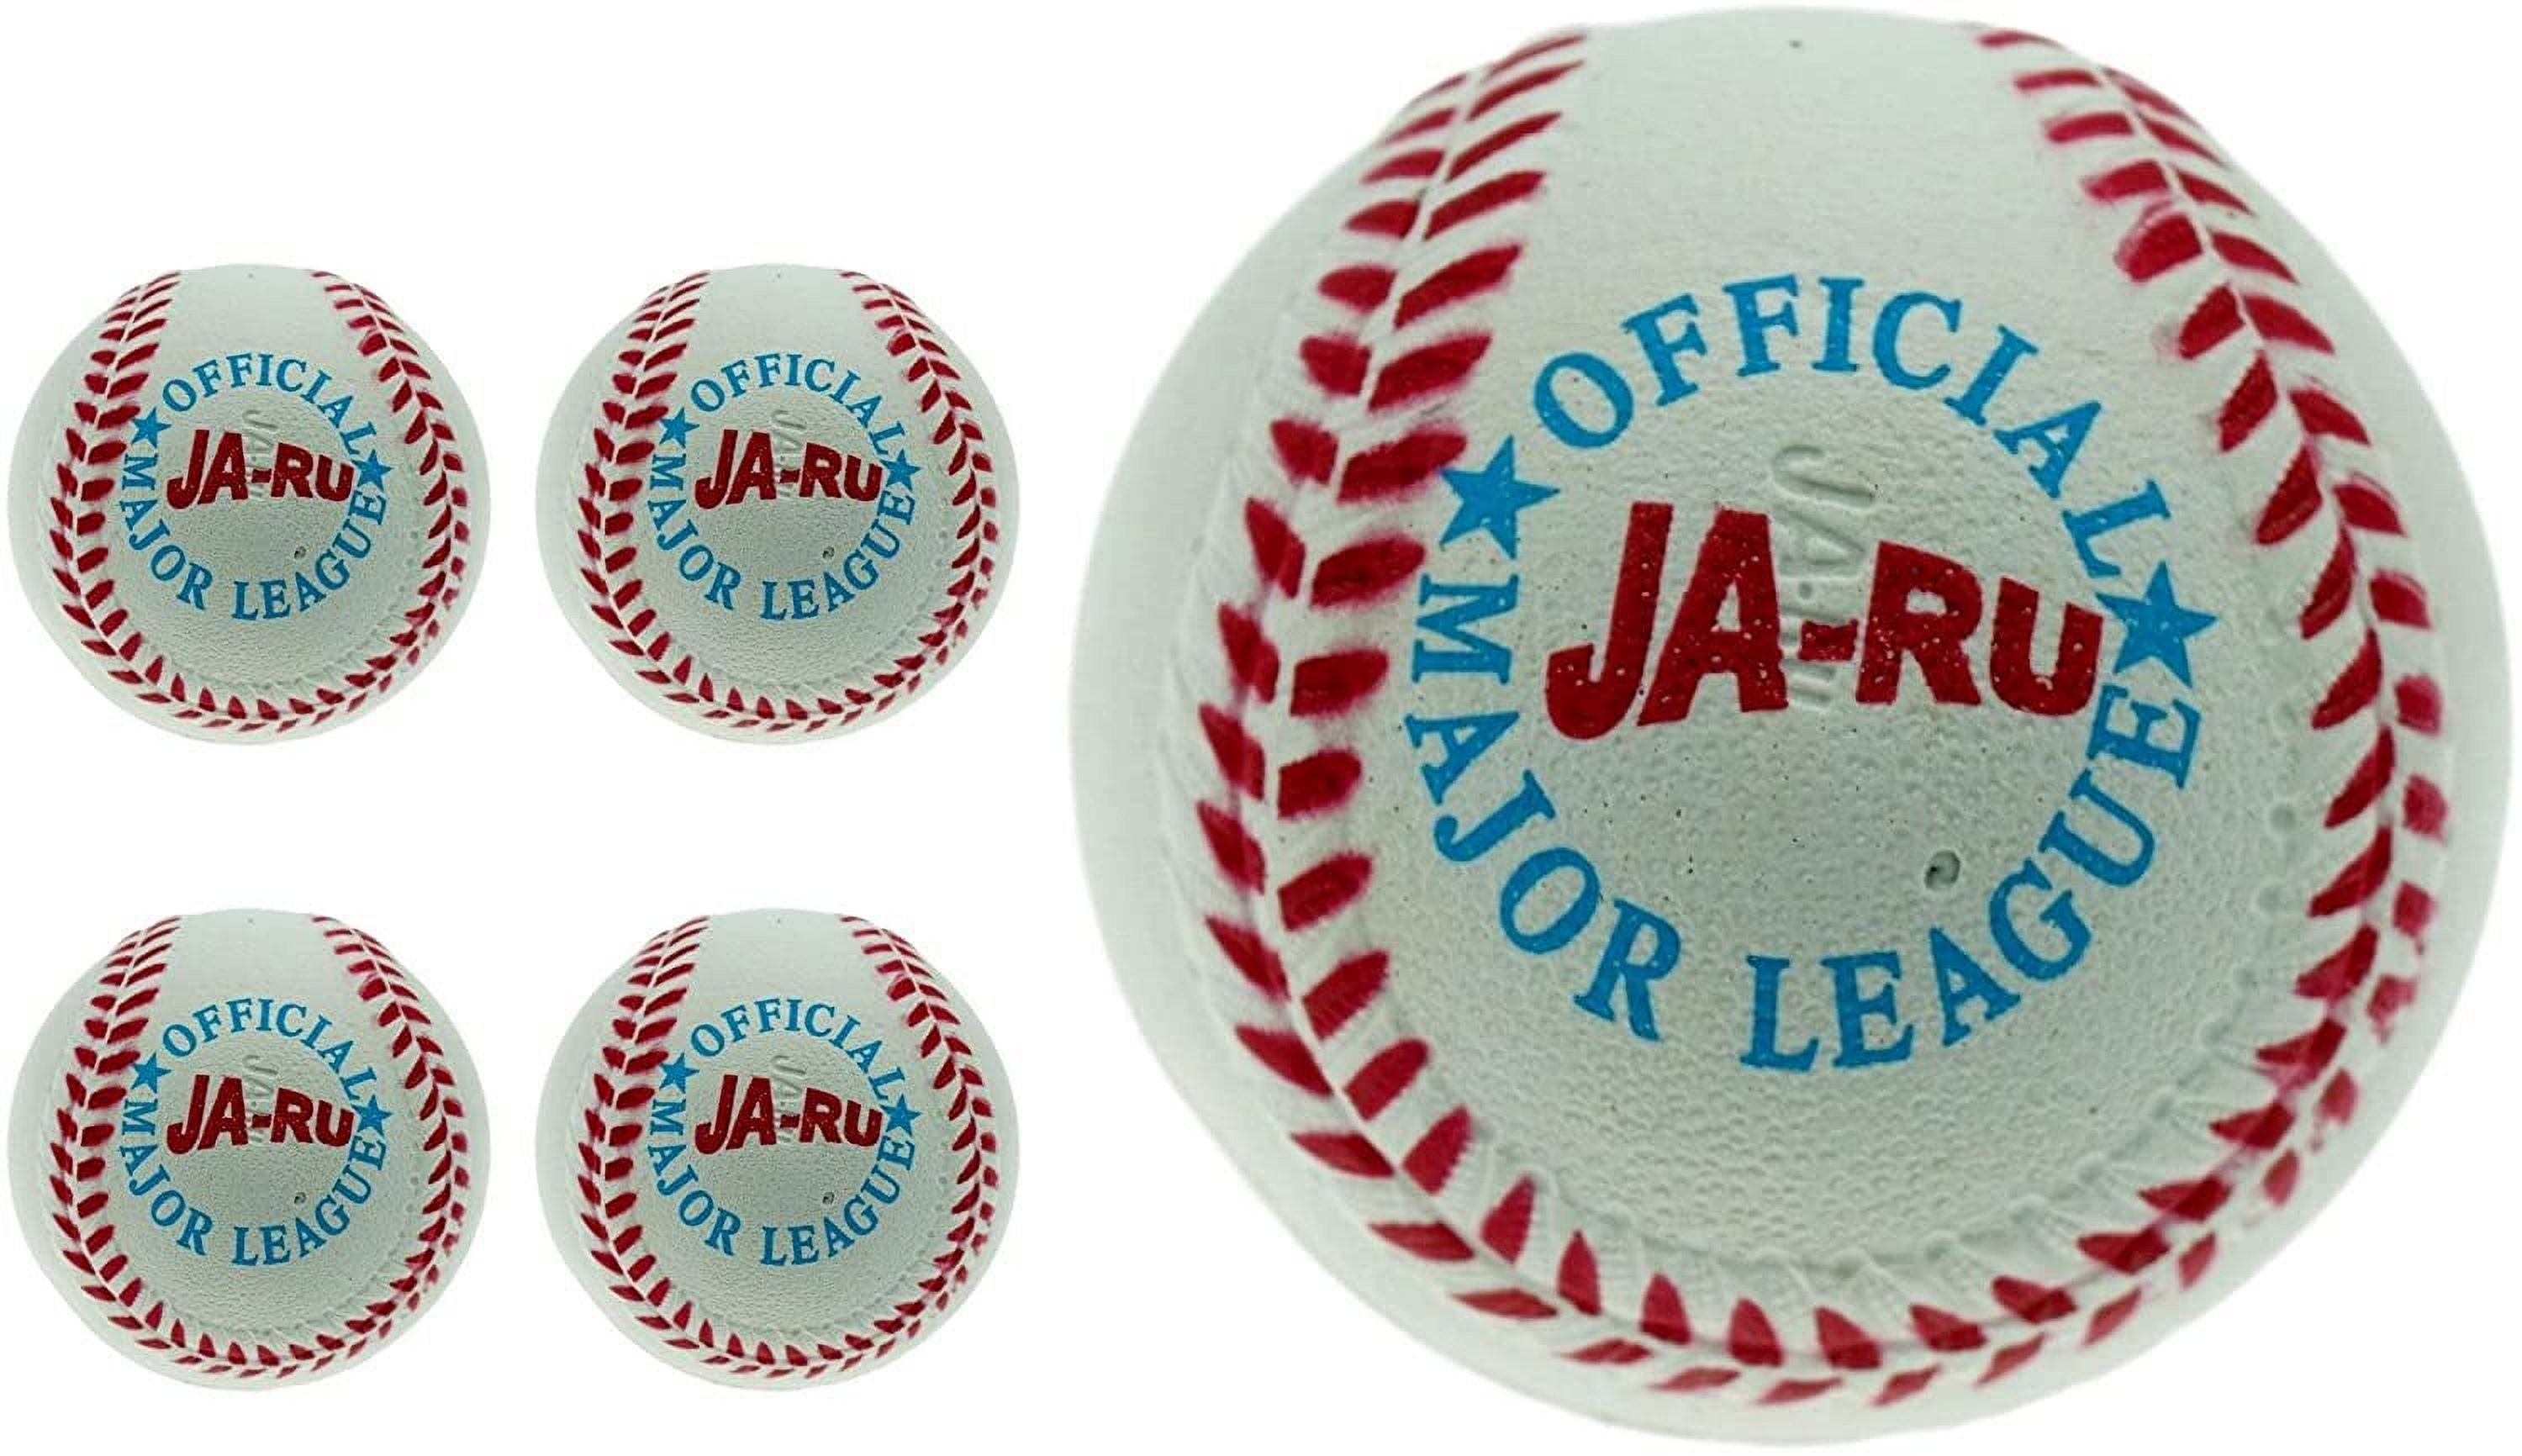 Rubber Bouncy Ball Soft Baseball Training Balls (Pack of 4) by JA-RU 2.5  Hi Bounce Same Like Pinky Balls for Play or Massage Therapy Plus 1